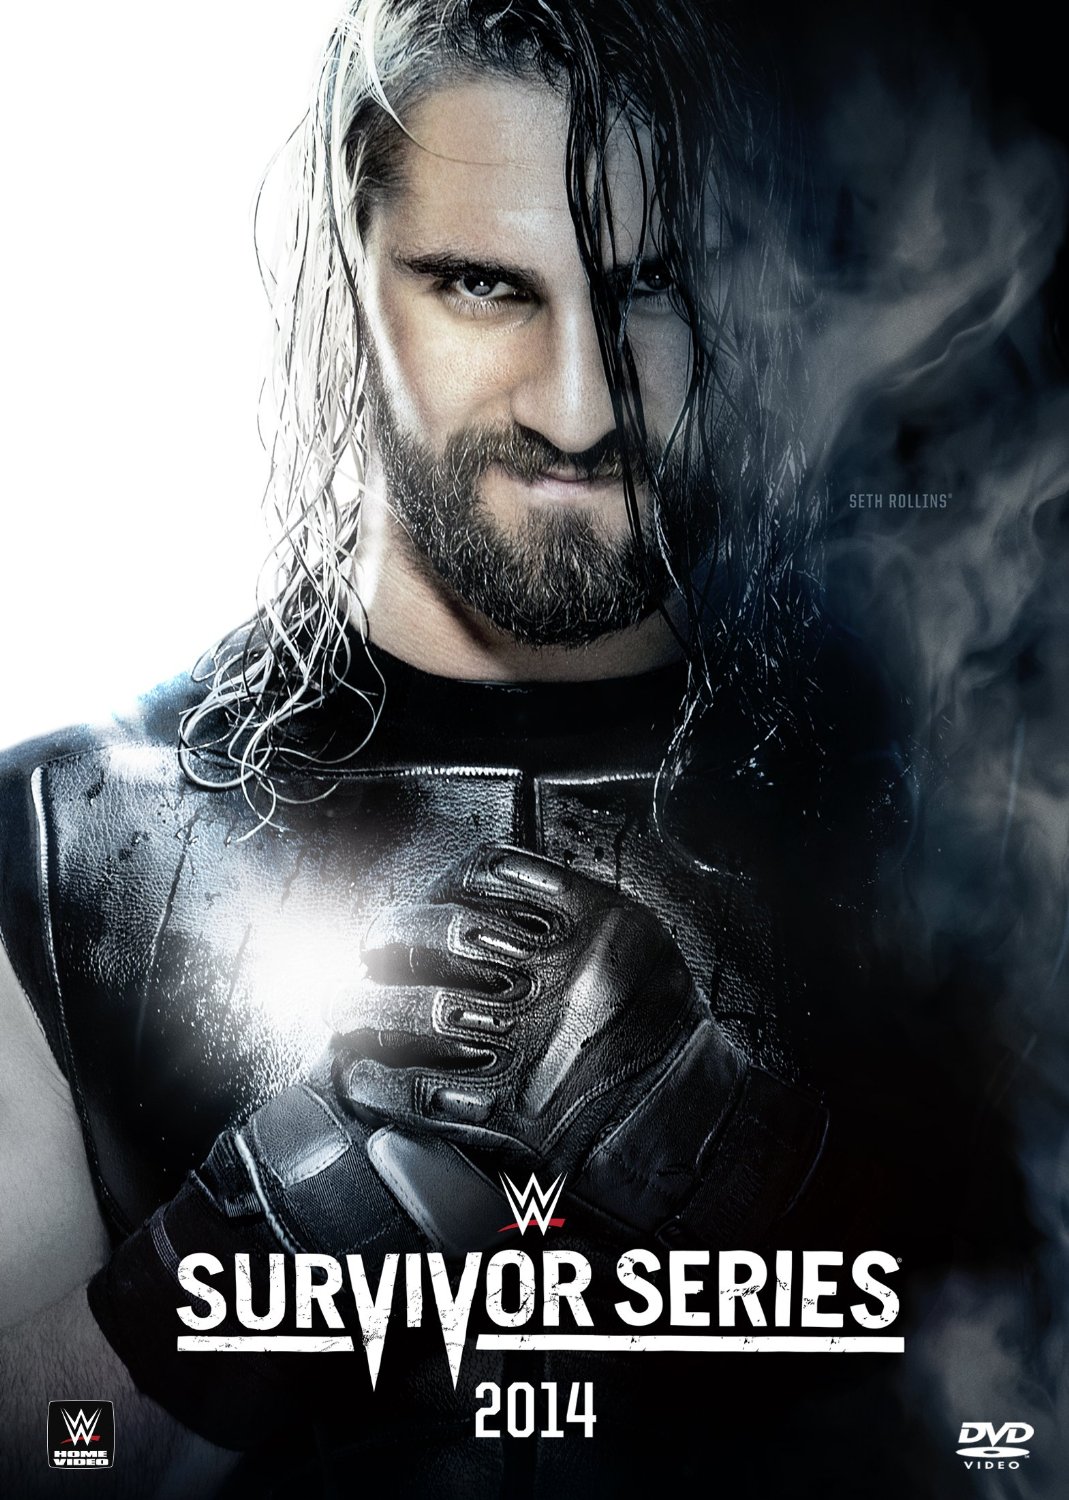 http://img3.wikia.nocookie.net/__cb20141025194339/prowrestling/images/a/a3/Survivor_Series_2014_Poster.jpg